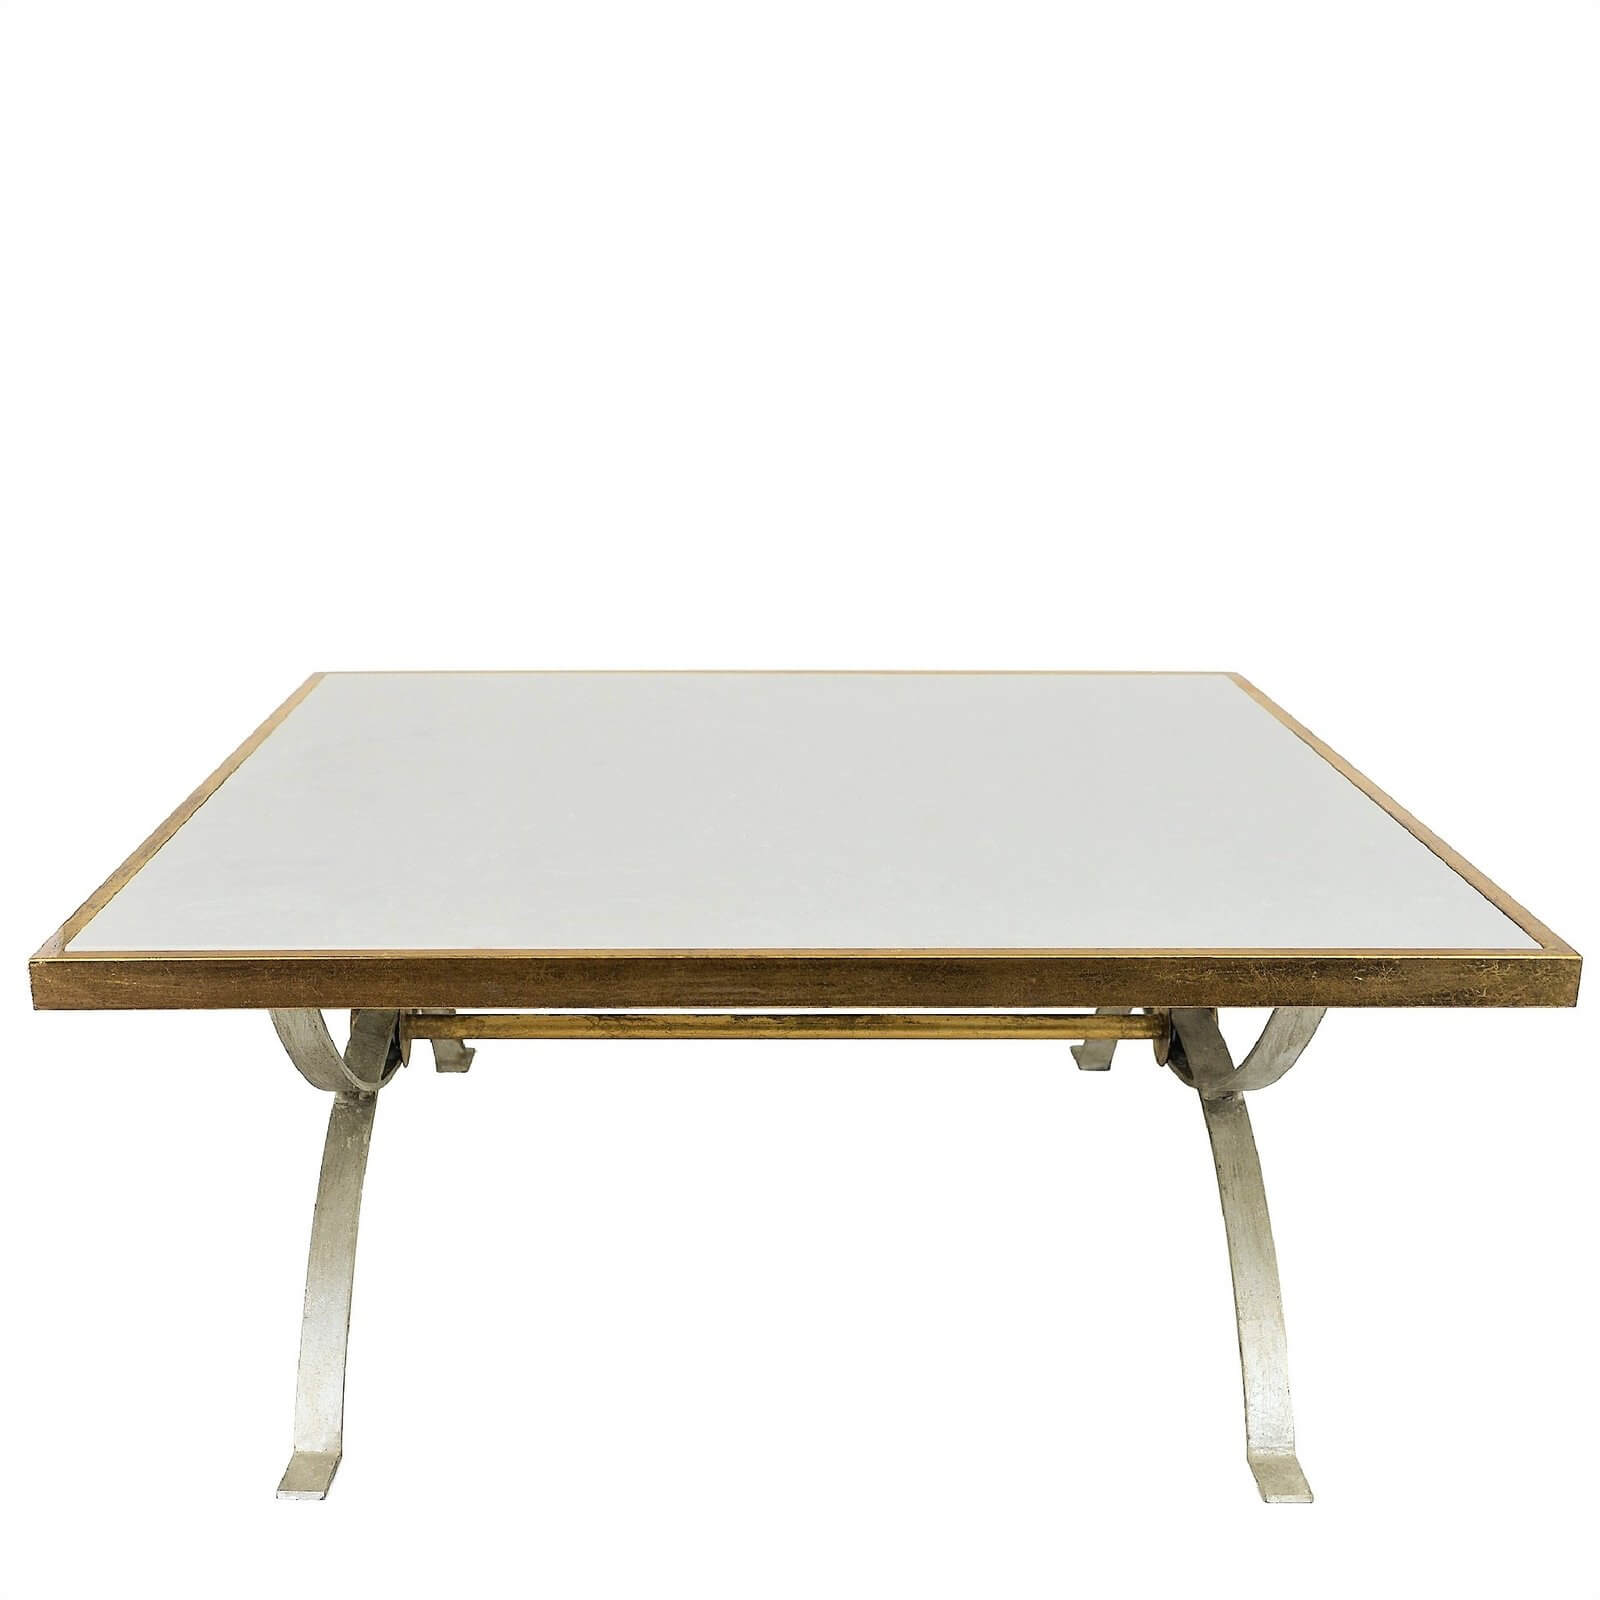 Tania Silver and Gold Square Coffee Table - Lillian Home 